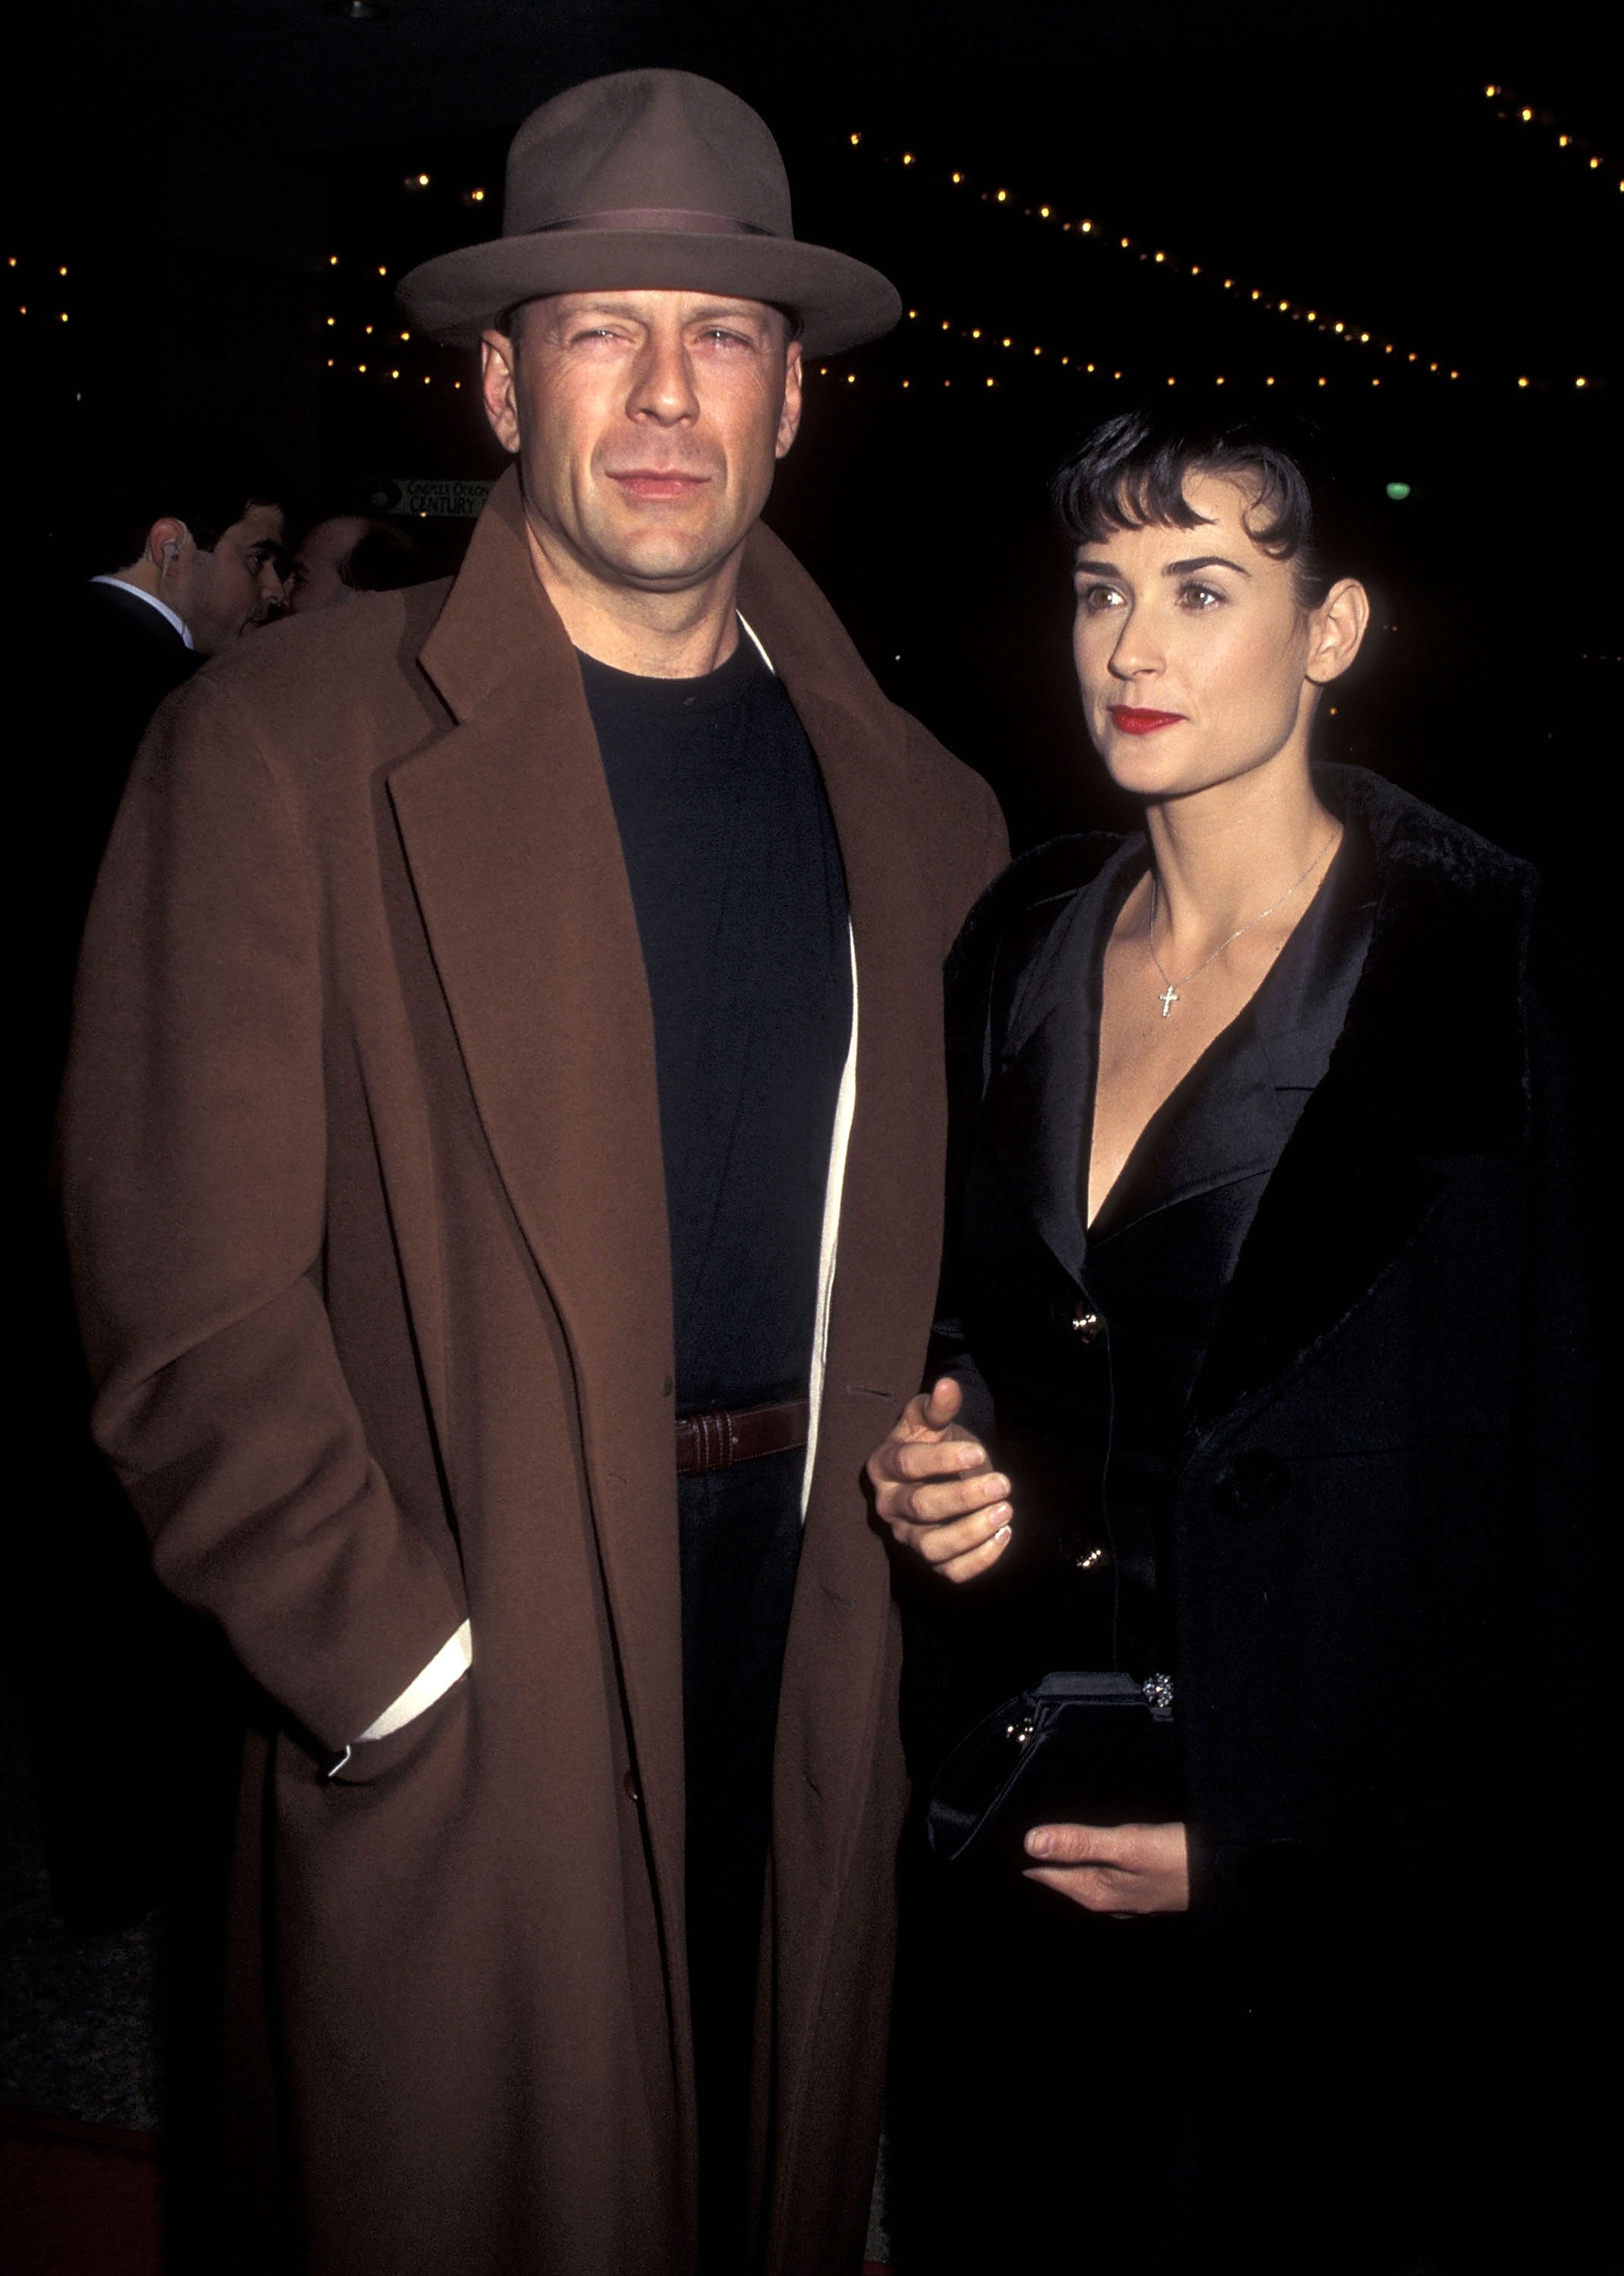 Bruce Willis and Demi Moore attend "The Juror" Century City Premiere at Cineplex Odeon Century Plaza Cinemas on January 29, 1996 in Century City, California ┃Source: Getty Images